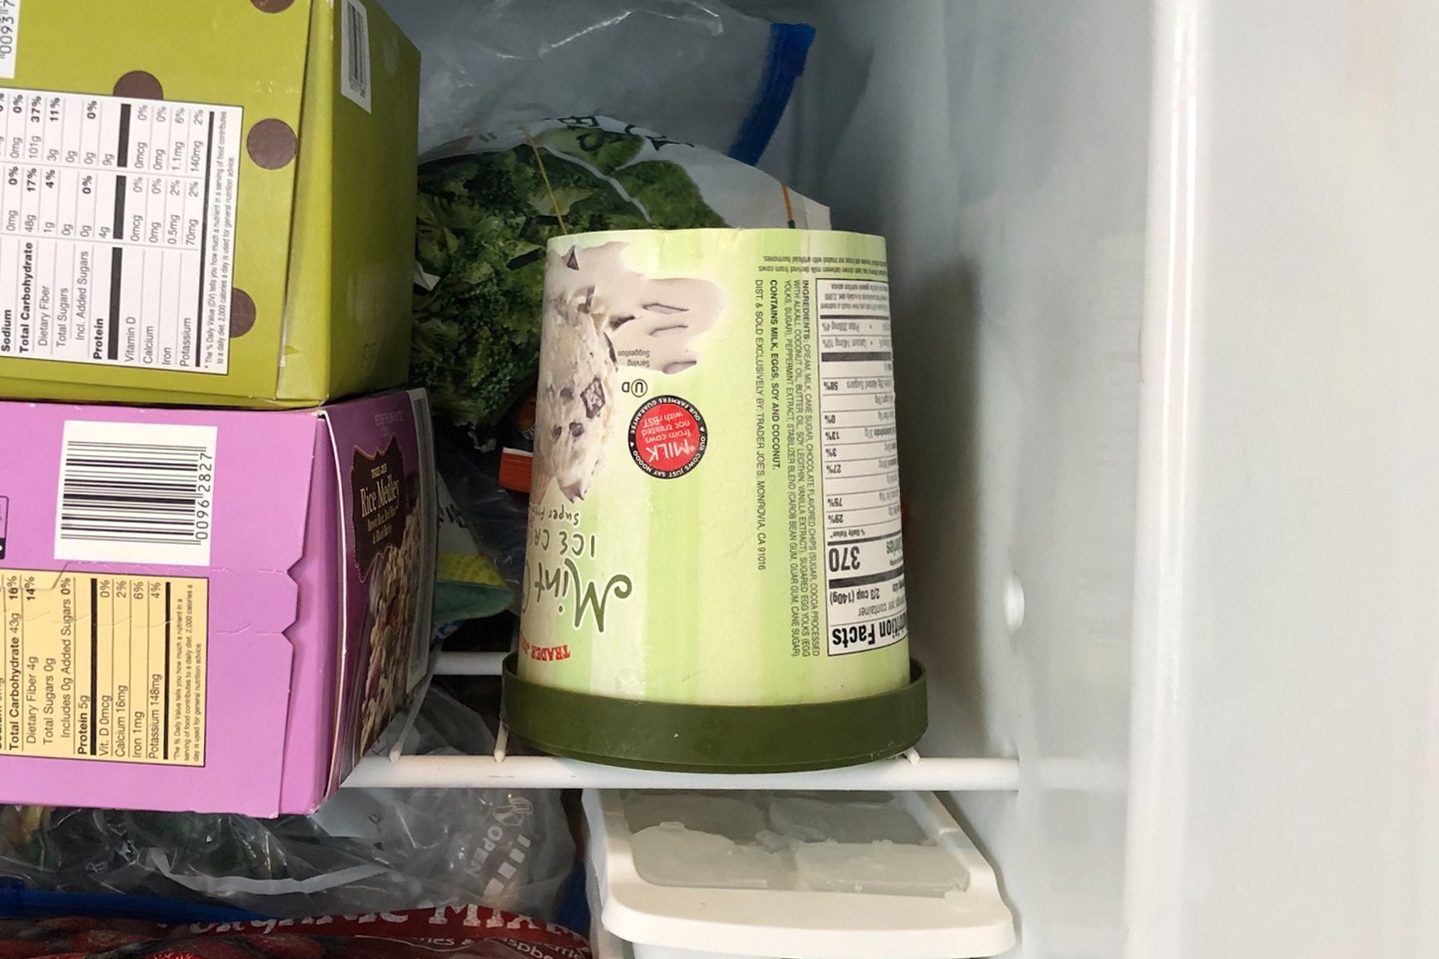 The Best Way to Store Ice Cream in Your Freezer